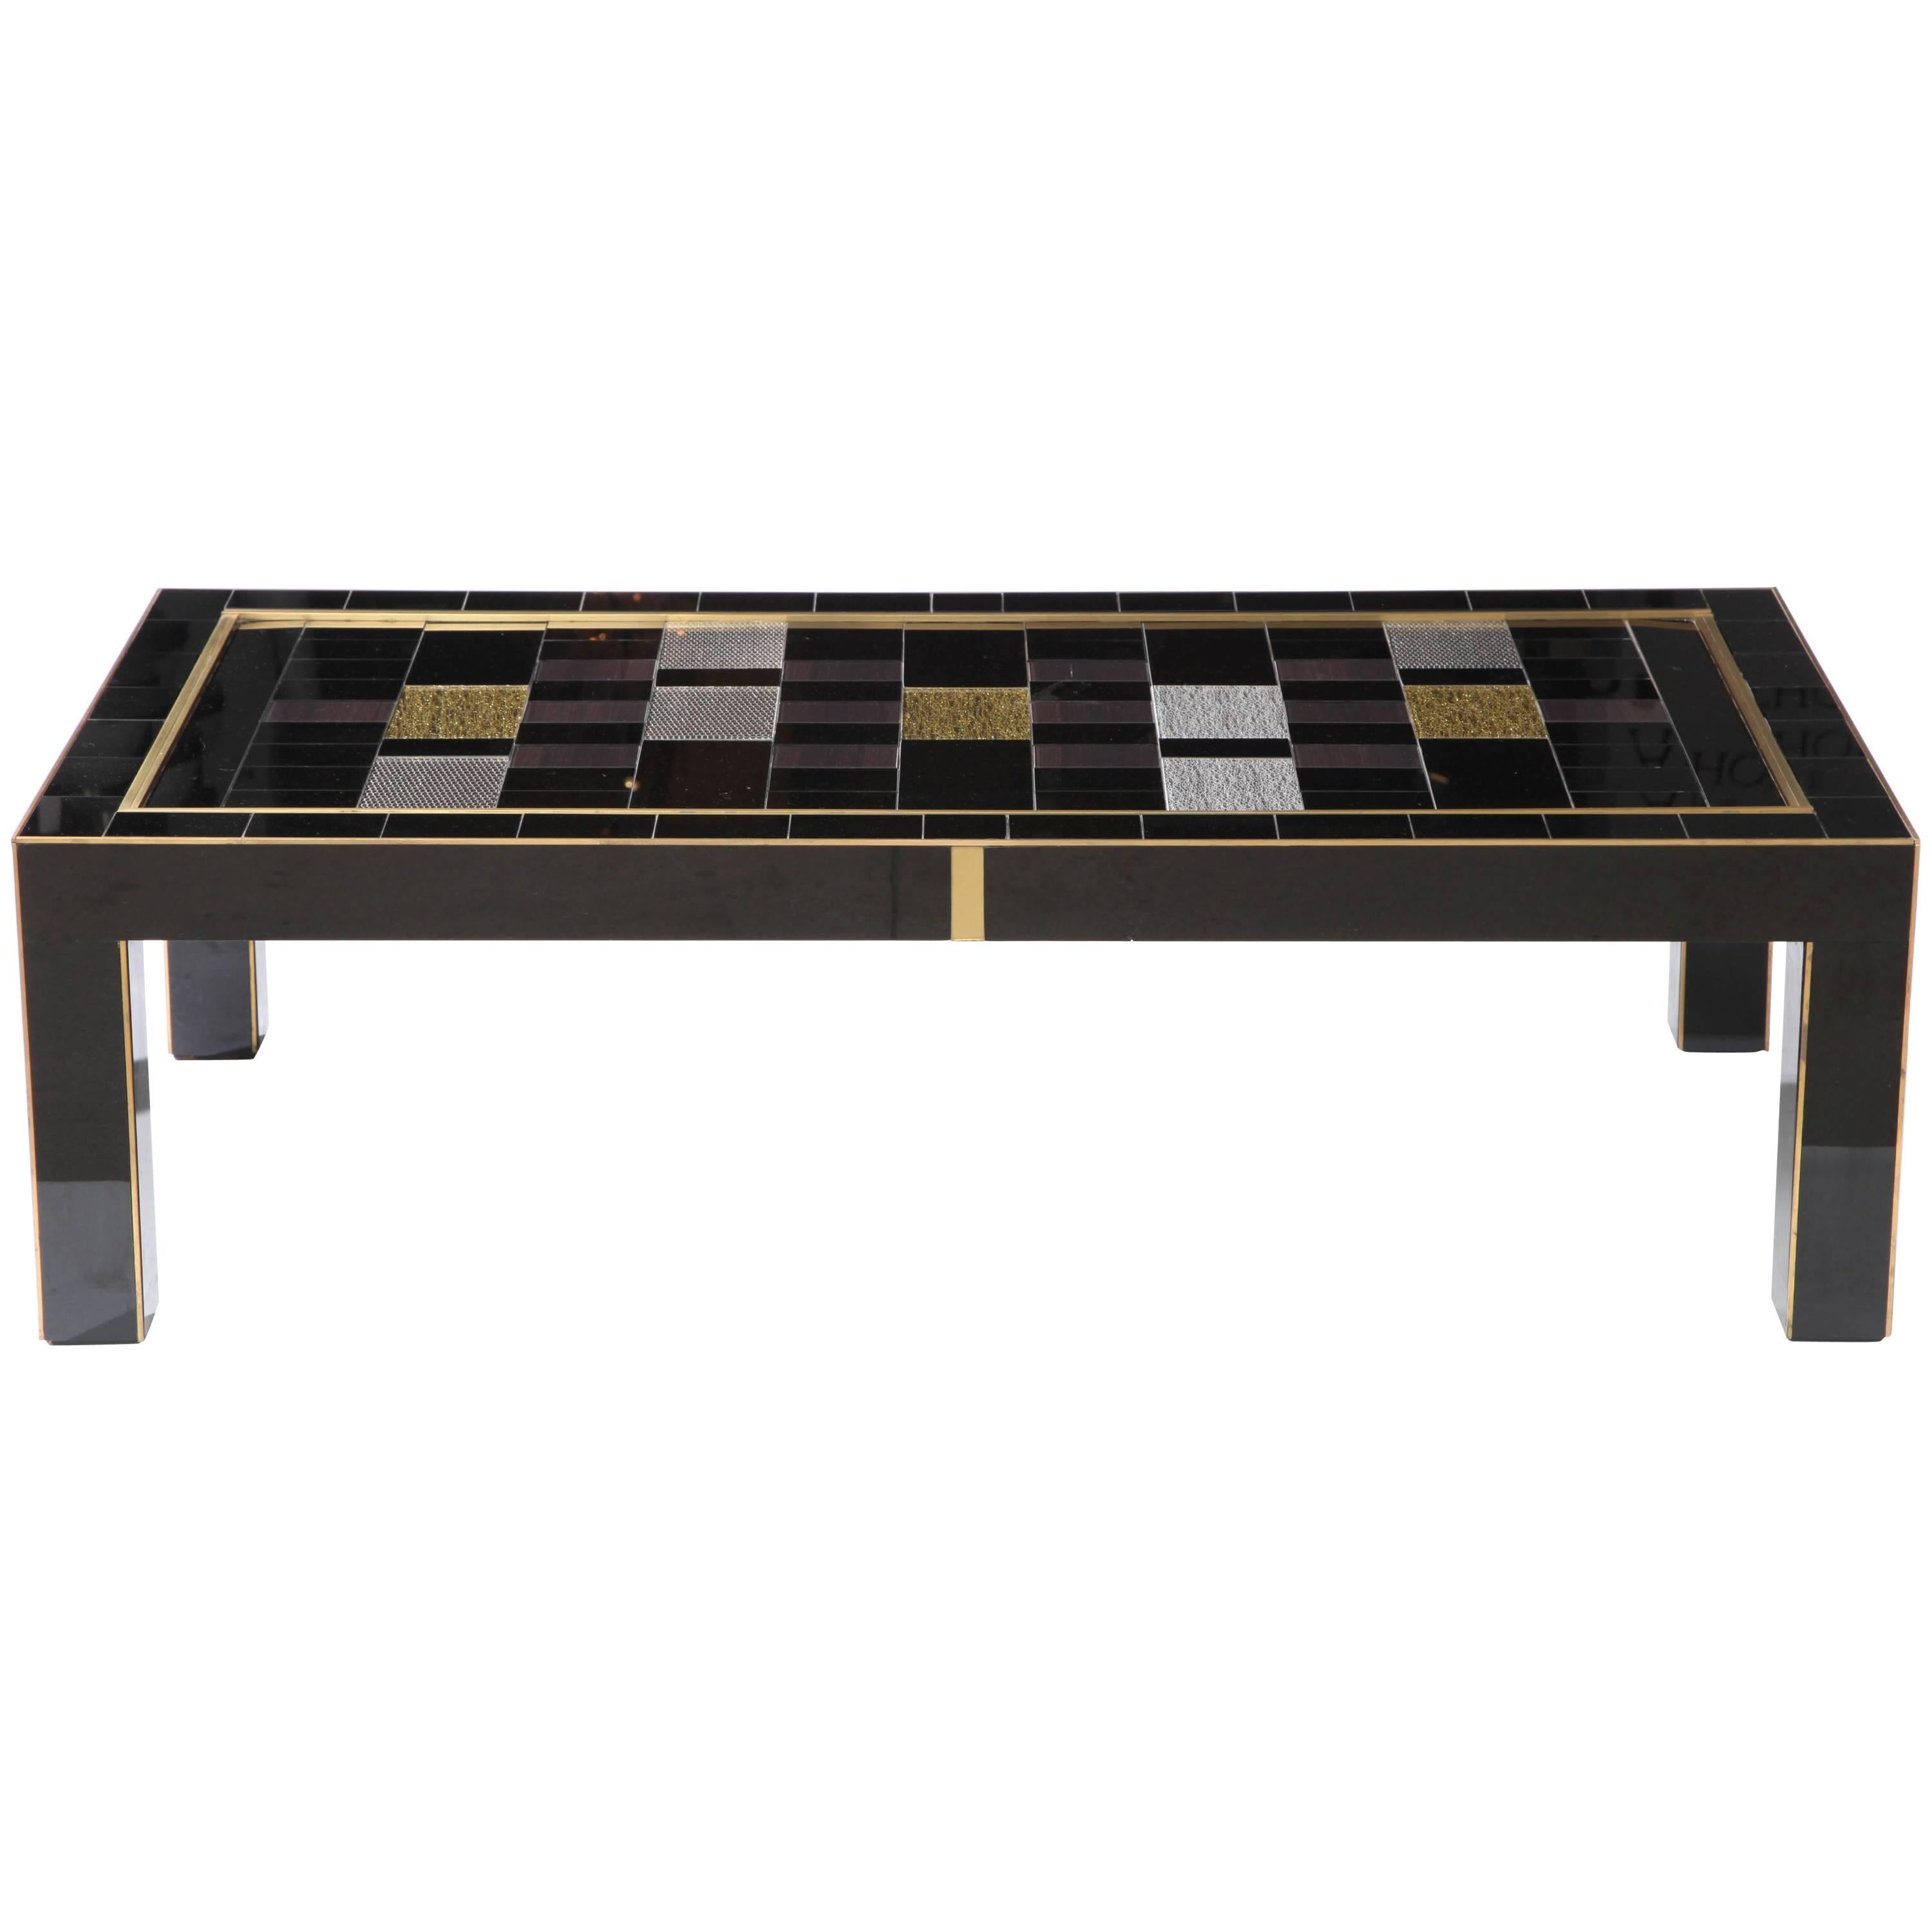 Custom Black, Silver and Gold Tinted Glass Coffee Table with Brass Inlays, Italy